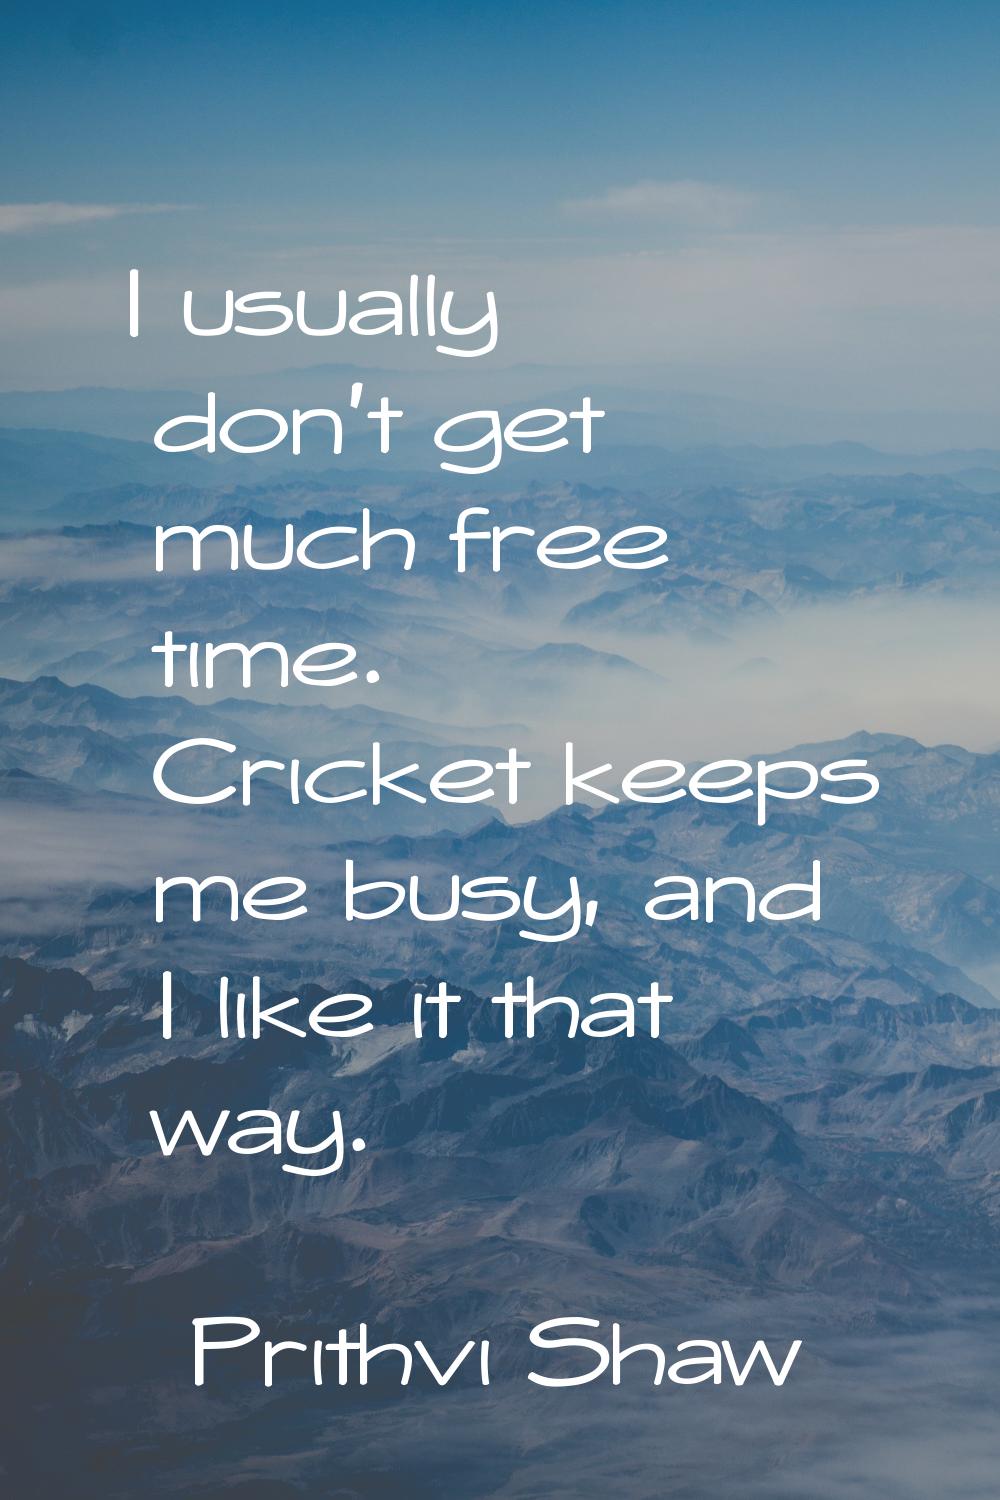 I usually don't get much free time. Cricket keeps me busy, and I like it that way.